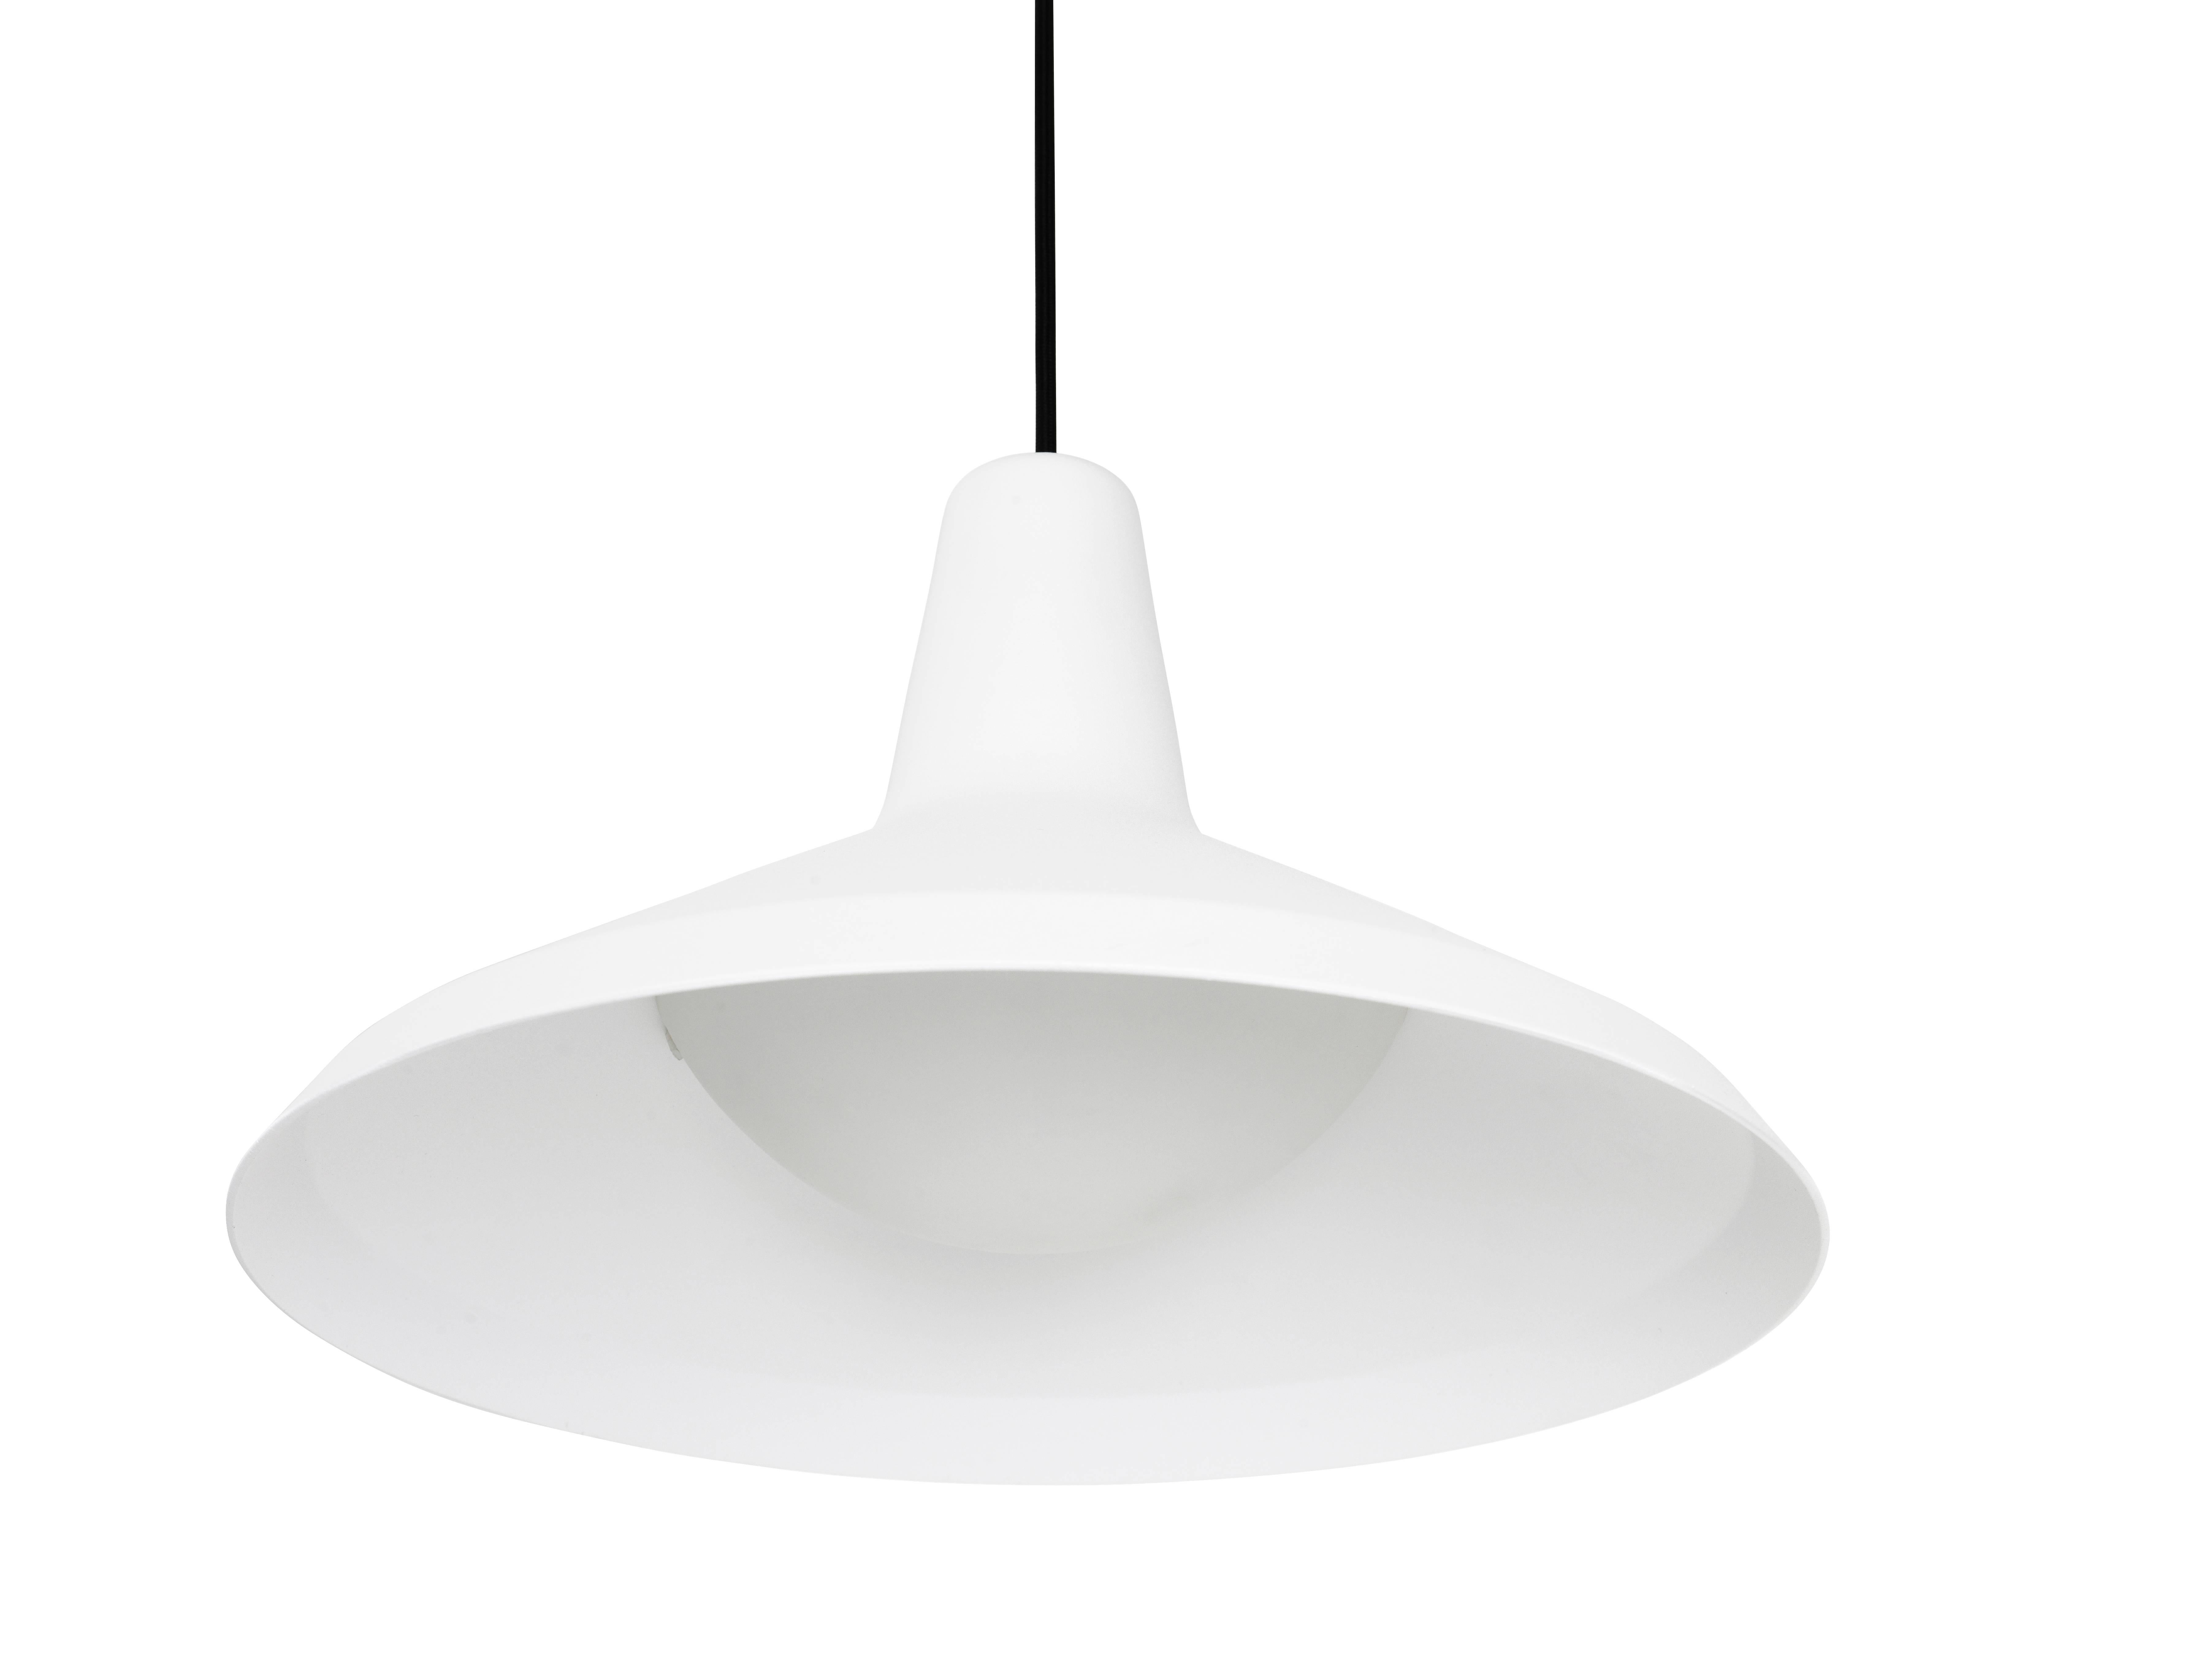 Greta Magnusson Grossman 'G-10' Pendant Lamp in White. Designed in 1950 by Grossman, this is an authorized re-edition by Gubi of Denmark who meticulously reproduces her work with scrupulous attention to detail and materials that are faithful to the